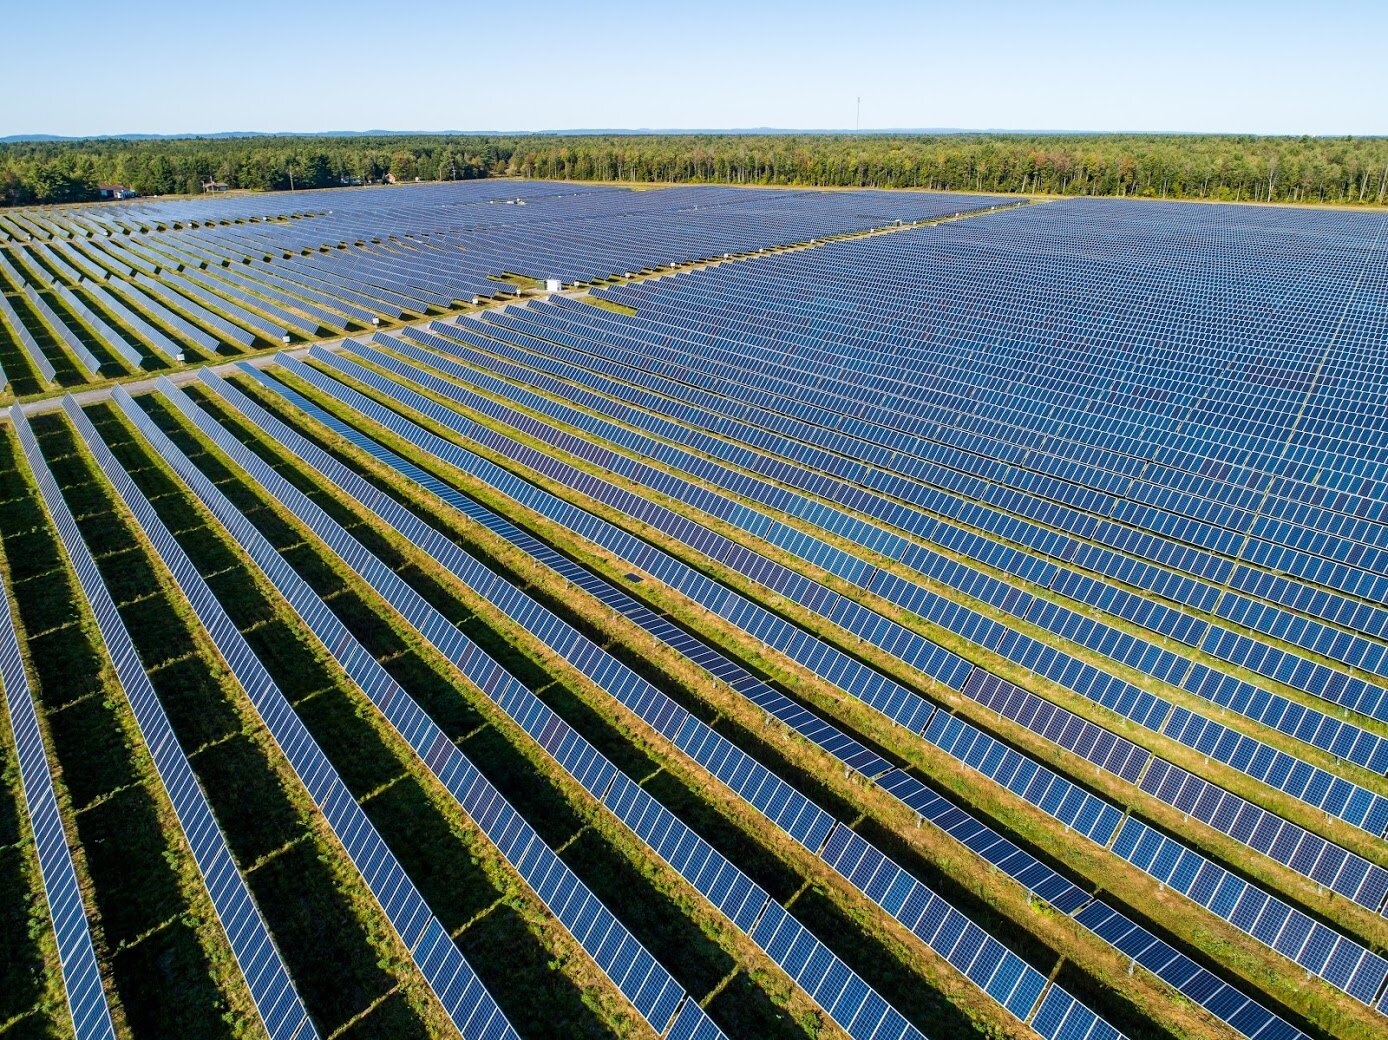 Travers Solar is a large solar project in Alberta, Canada.